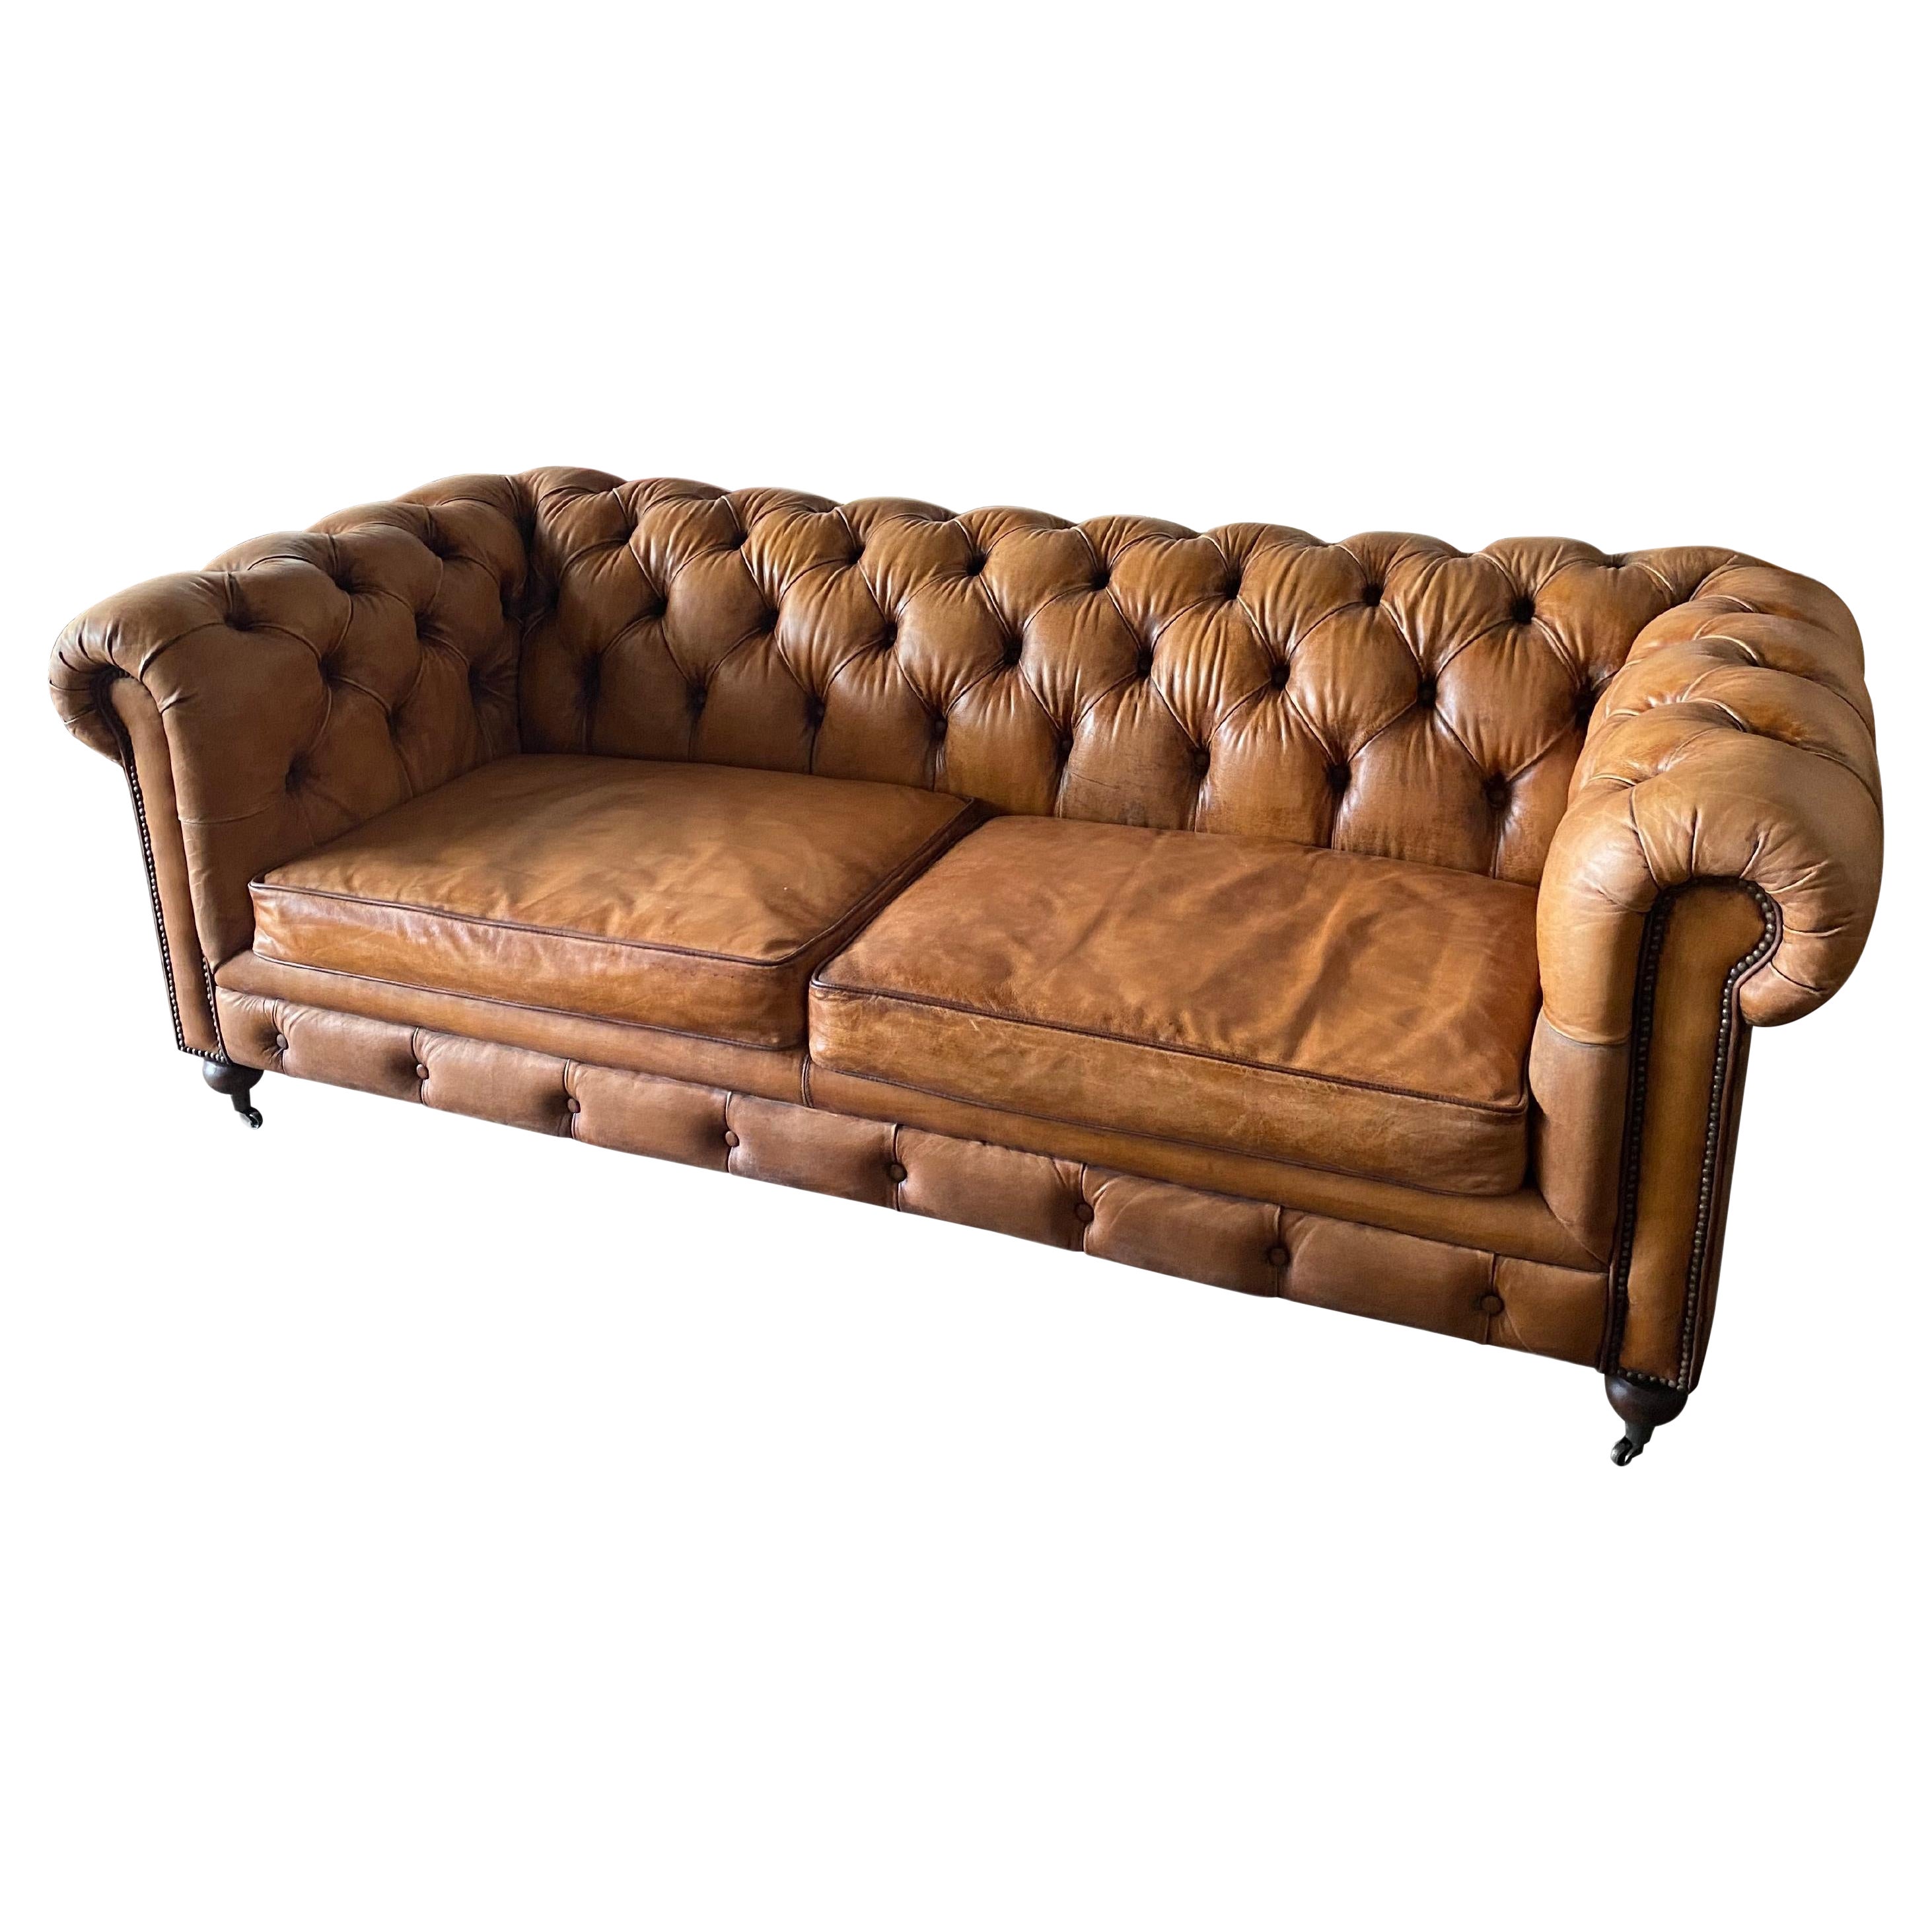 One Pair English Style Leather Chesterfield, Great Color with a Hand Applied Pat